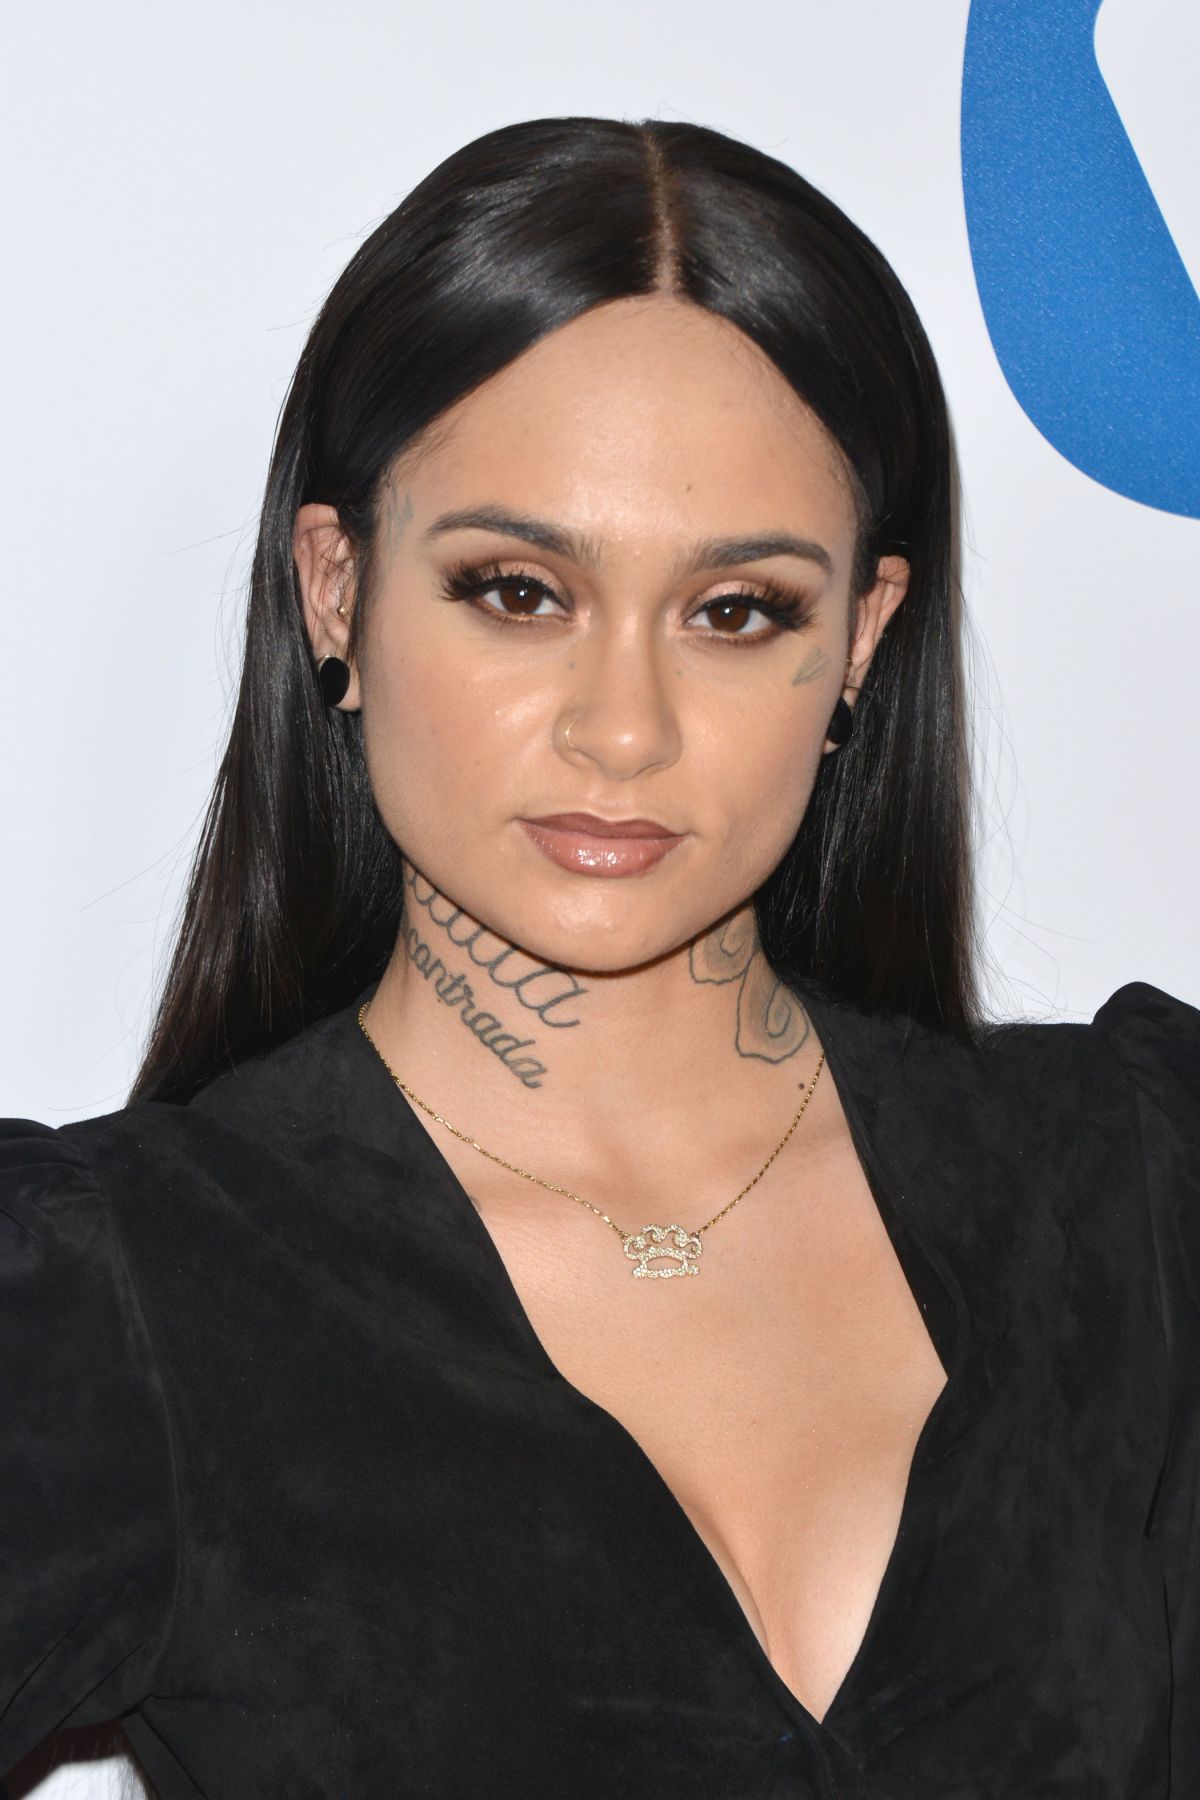 kehlani-at-warner-music-group-grammy-after-party-in-los-angeles-02-12-2017_4.jpg